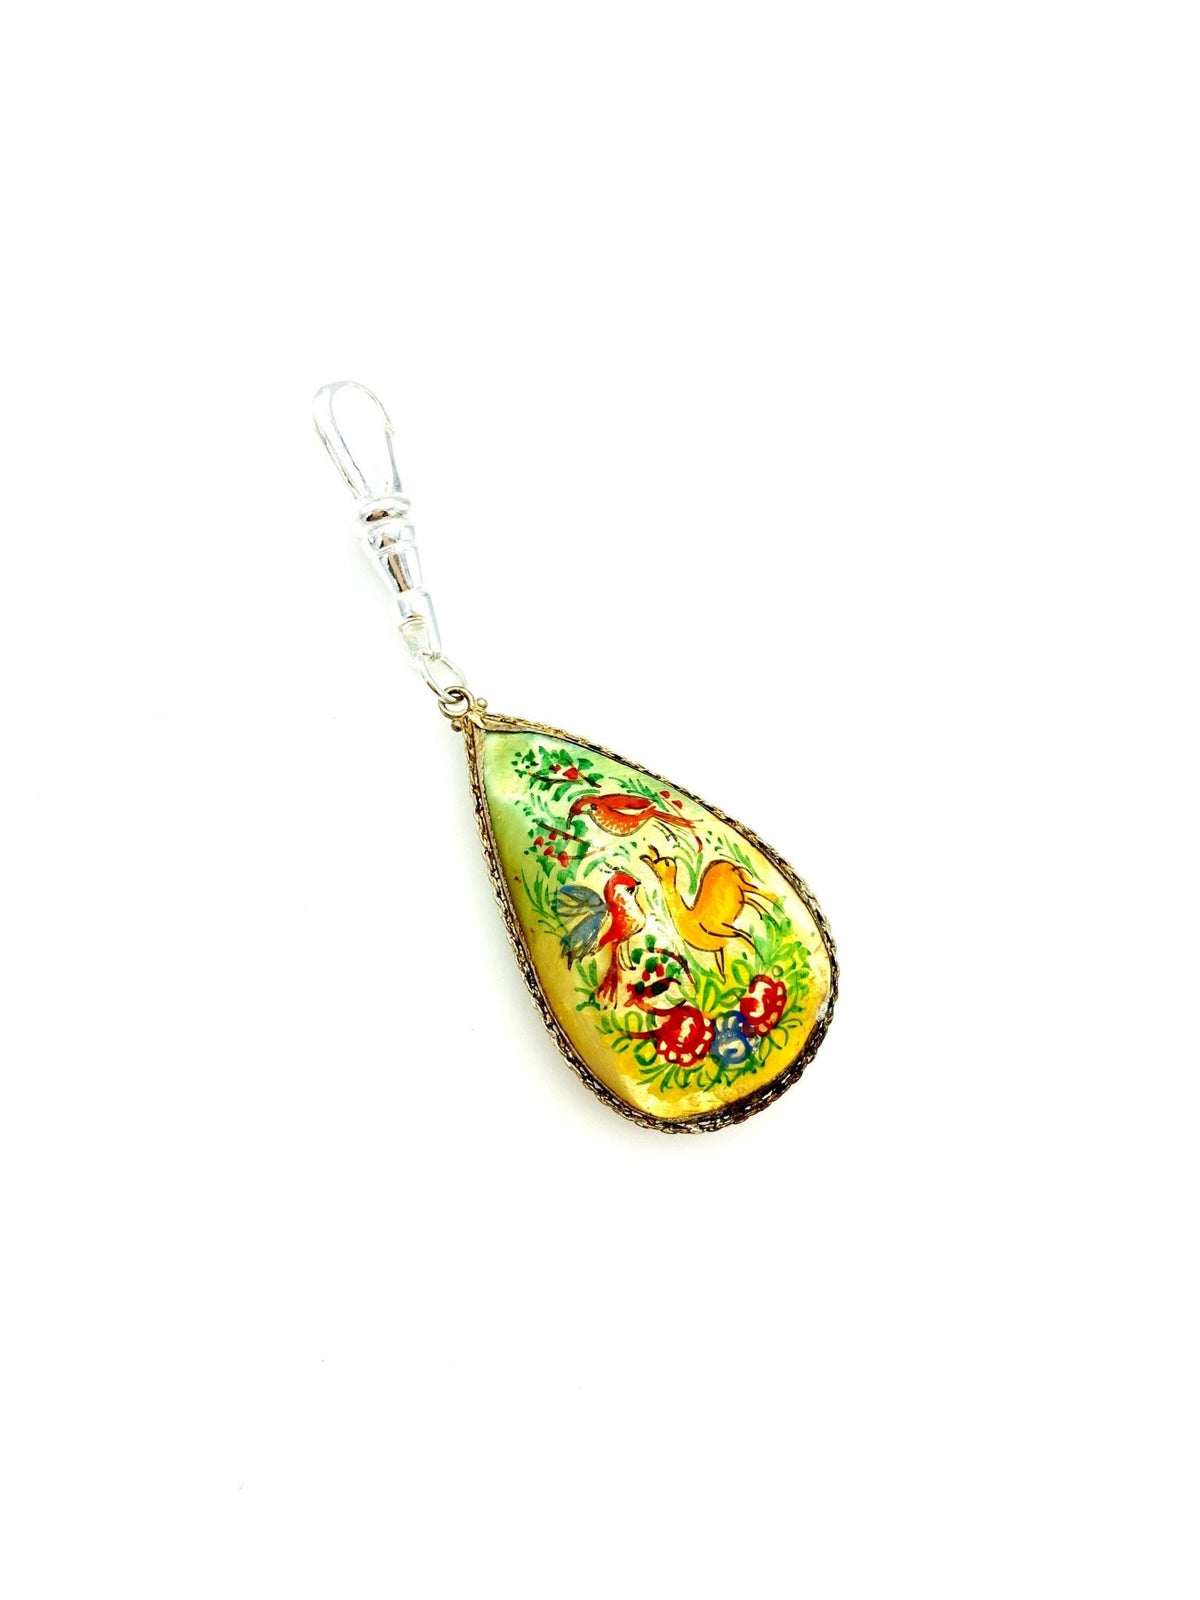 Teardrop Hand Painted Nature Scene Charm - 24 Wishes Vintage Jewelry